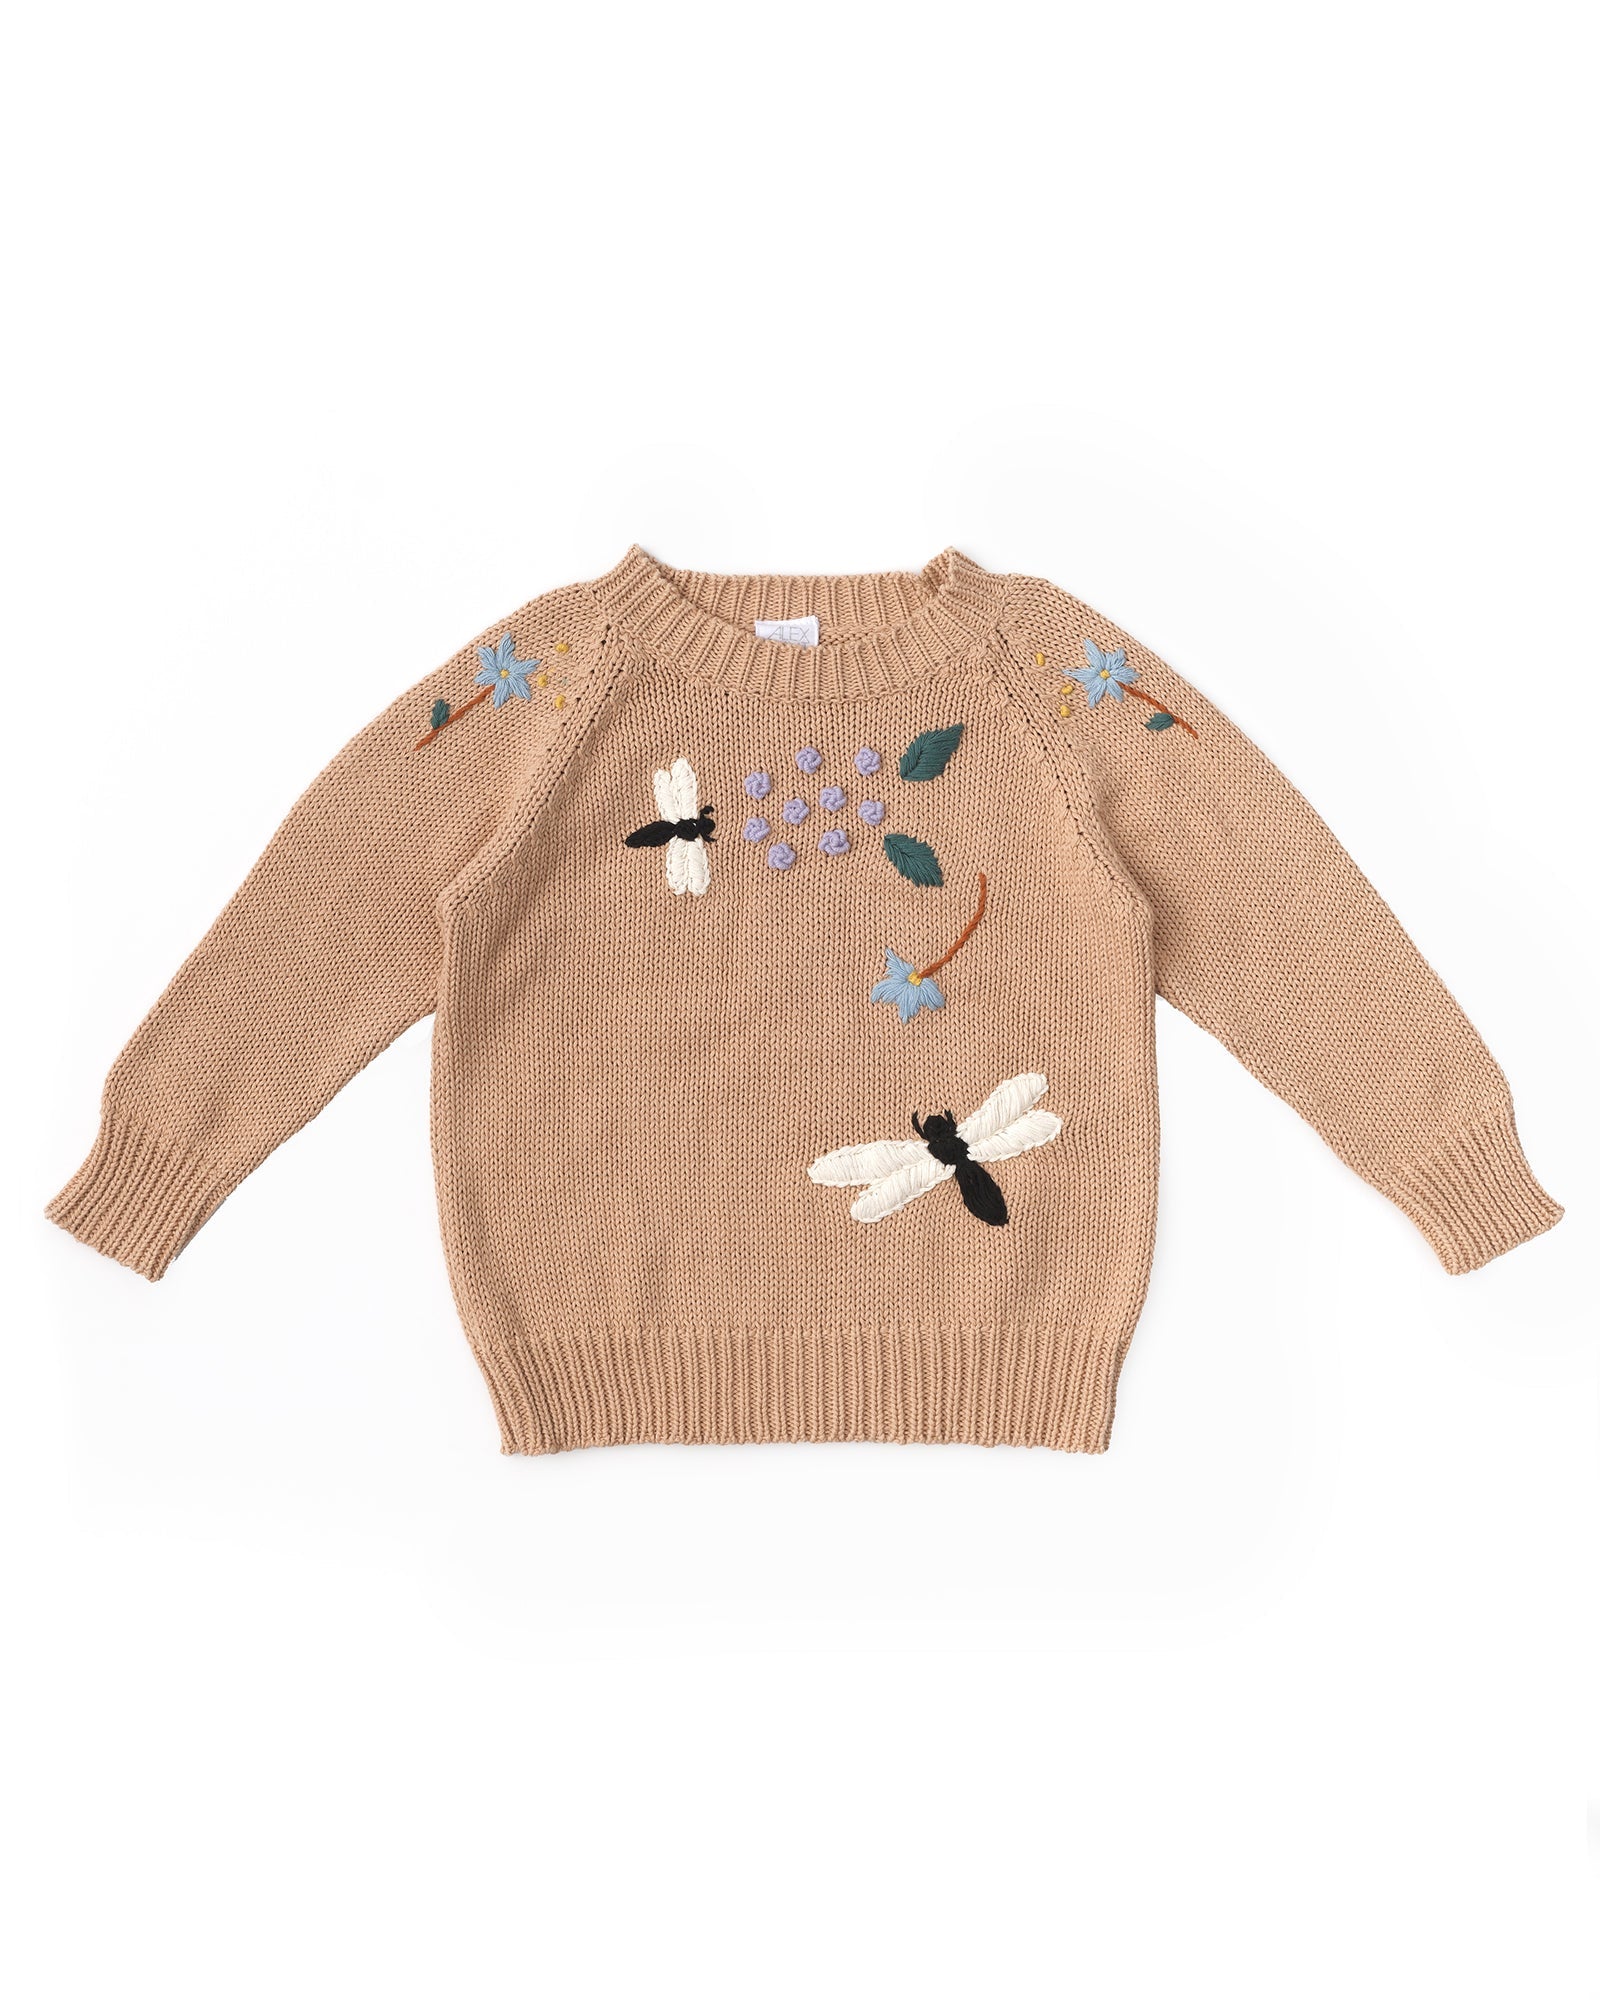 Alex and Ant Flora Knit - Brulle